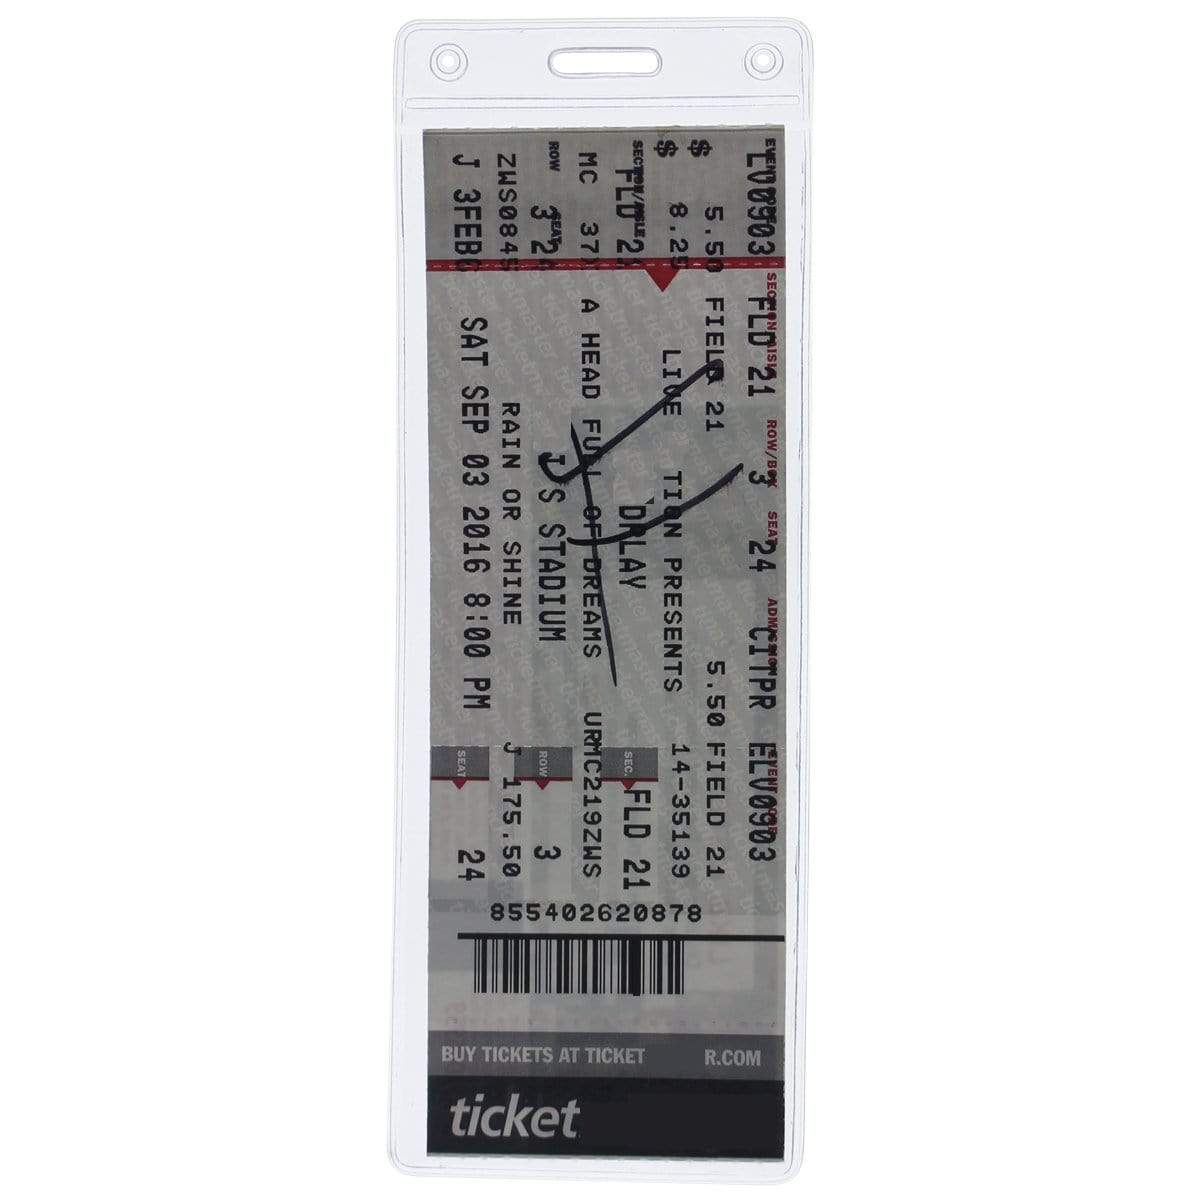 Clear Ticket Holder for 2 1/8 X 5 5/8 Inch (Ticketmaster Size) Concert and Sporting Event Tickets & Credentials (SPID-1140)